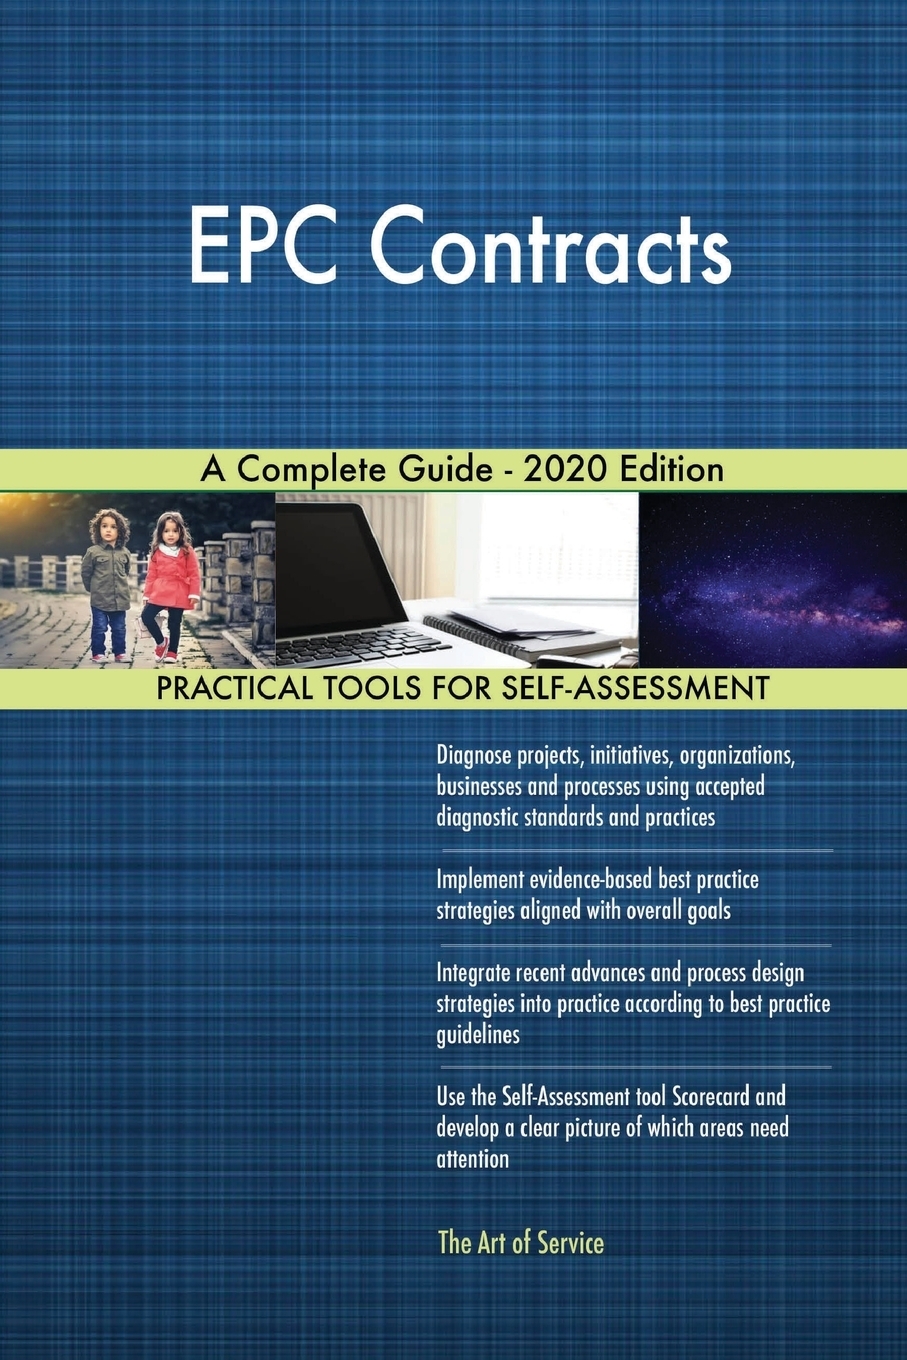 фото EPC Contracts A Complete Guide - 2020 Edition